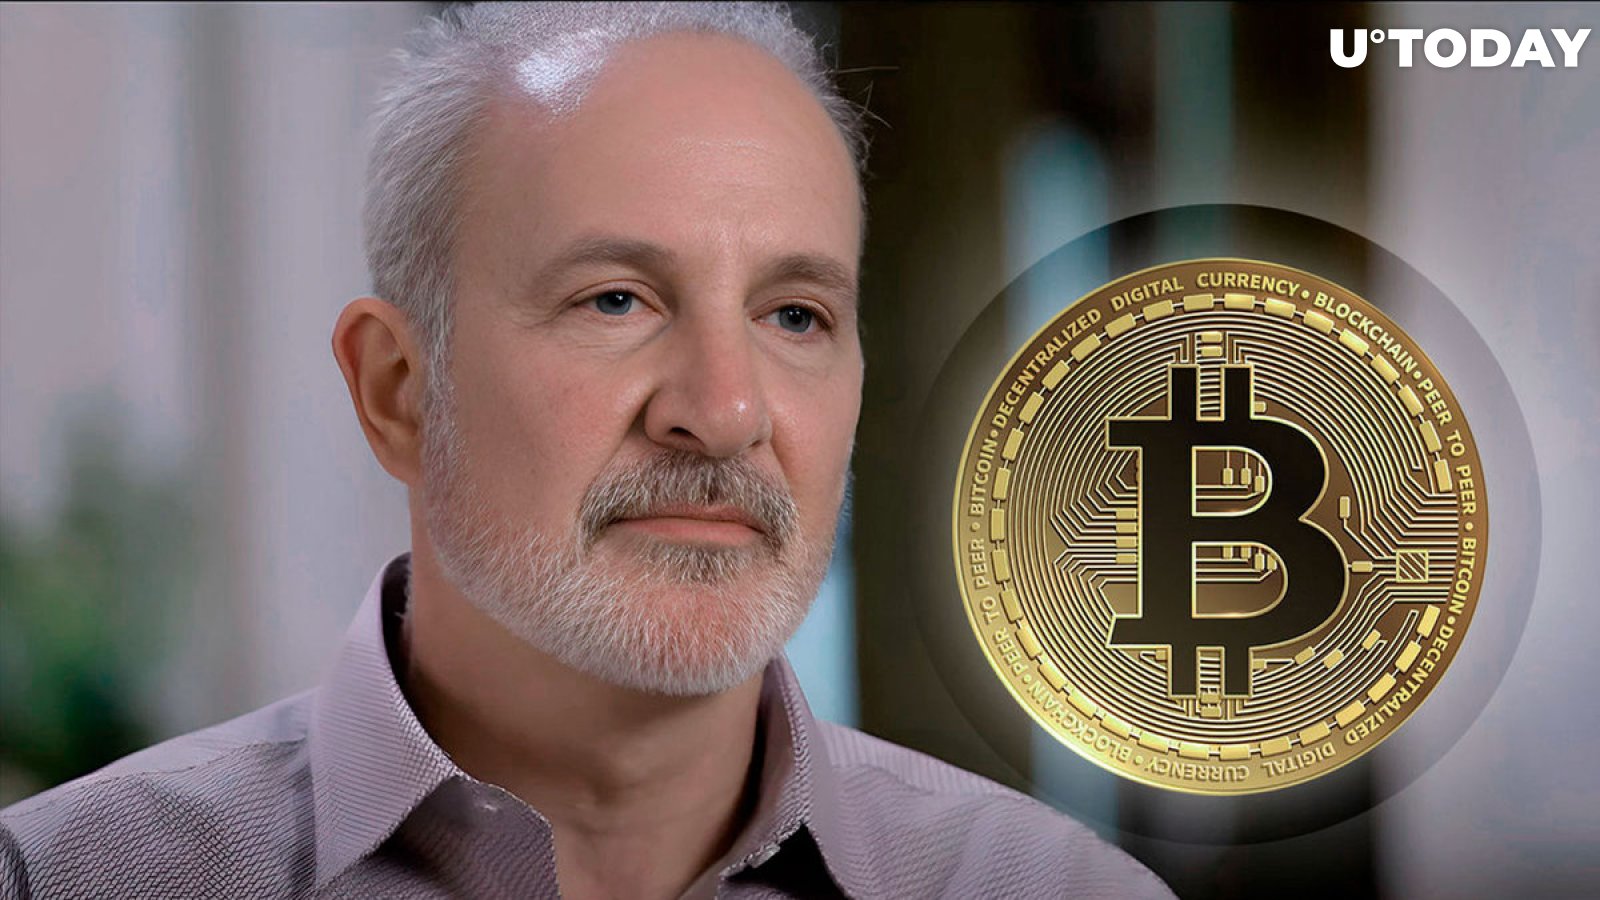 Peter Schiff Doesn't Own Any Bitcoin: Statement